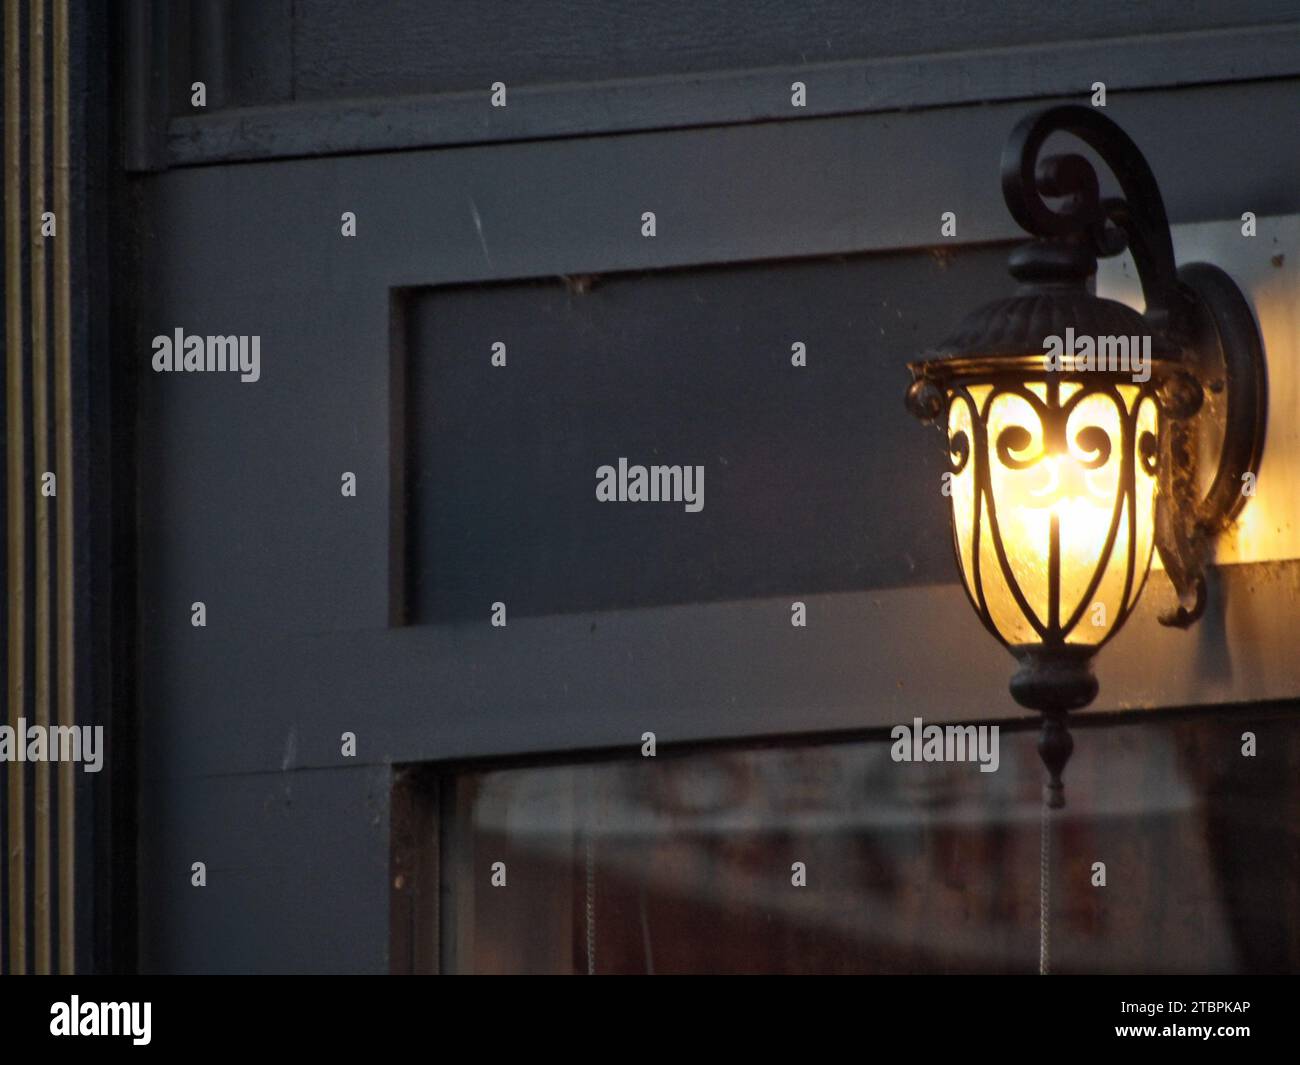 A modern light fixture is illuminated on an exterior wall of an urban building, emitting a warm, inviting glow Stock Photo